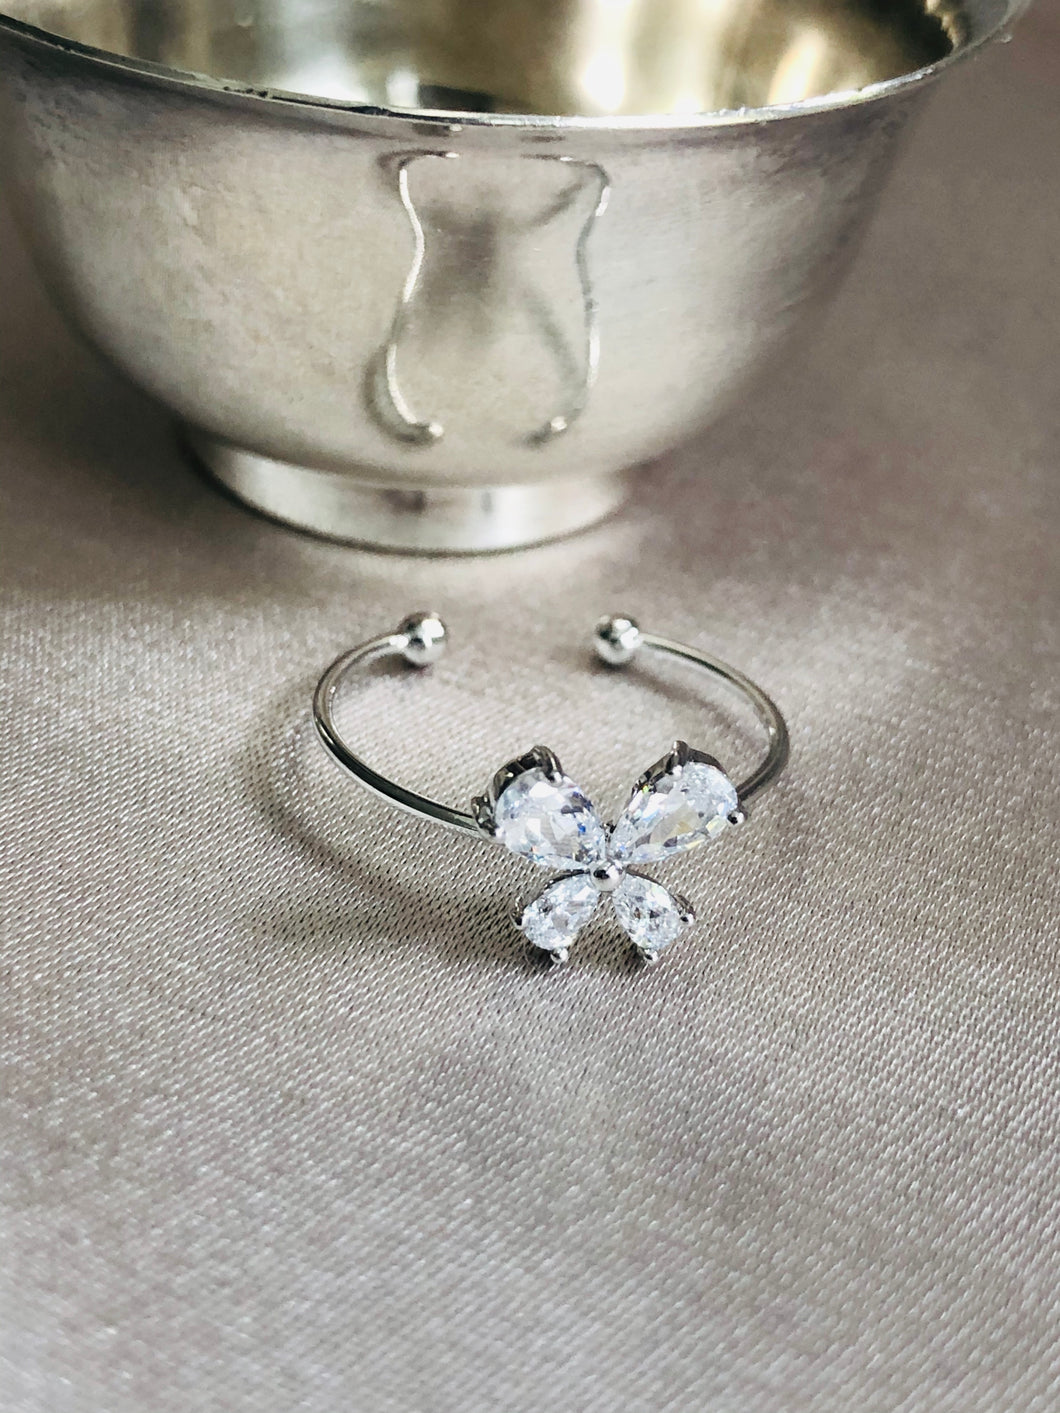 Crystal Clover Ring